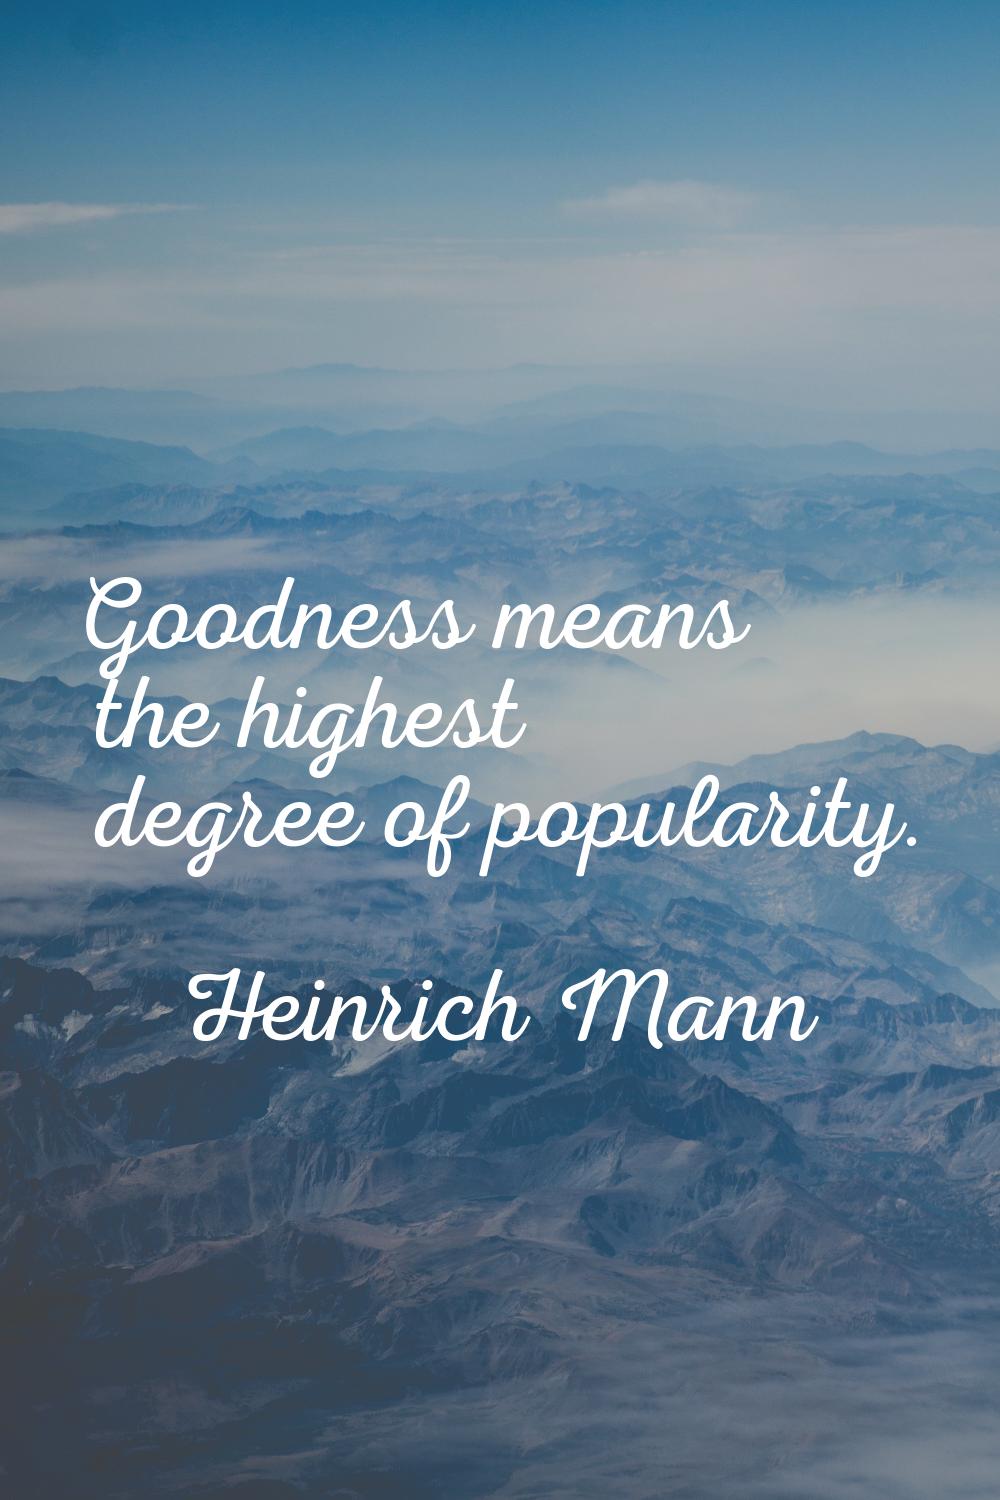 Goodness means the highest degree of popularity.